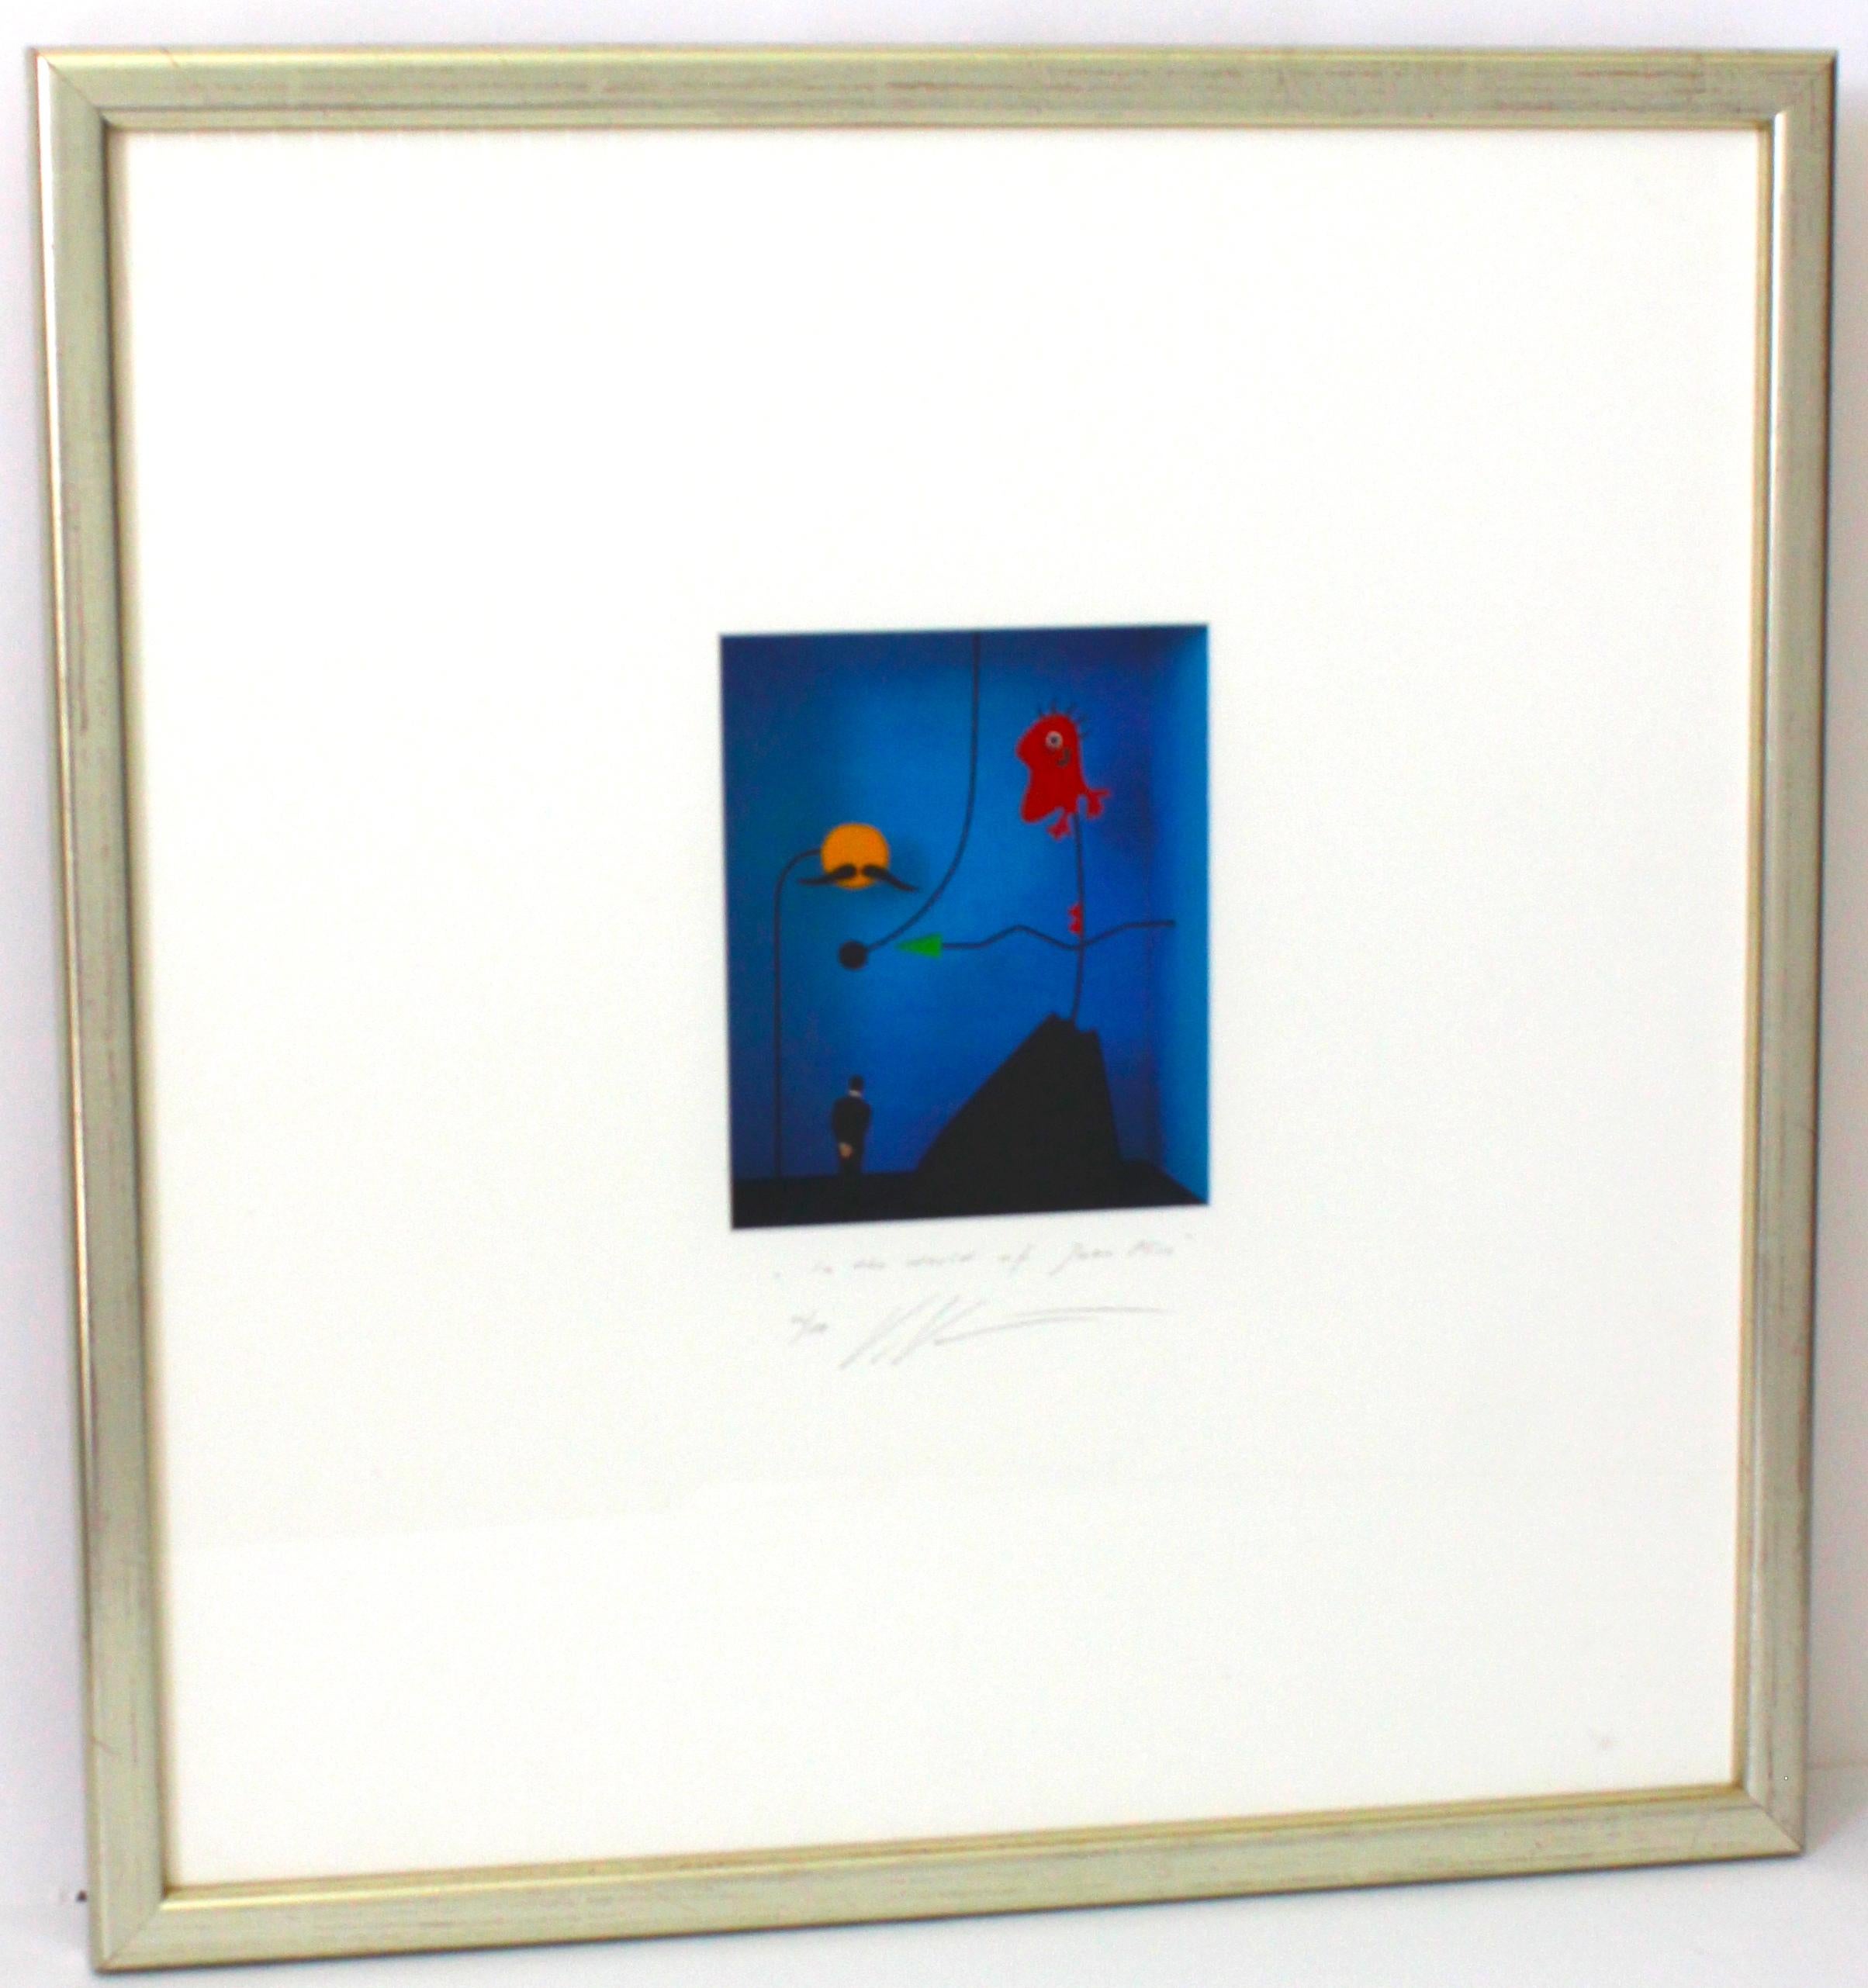 This stylish a mod shadow box creation by Volker Kuhn will capture your imagination with its size and form.

Artist: Volker Kuhn, German b. 1948

Title: In the World of Jean Miro

Edition: 42/150

Circa: 1970s

Note: Shadow box measures